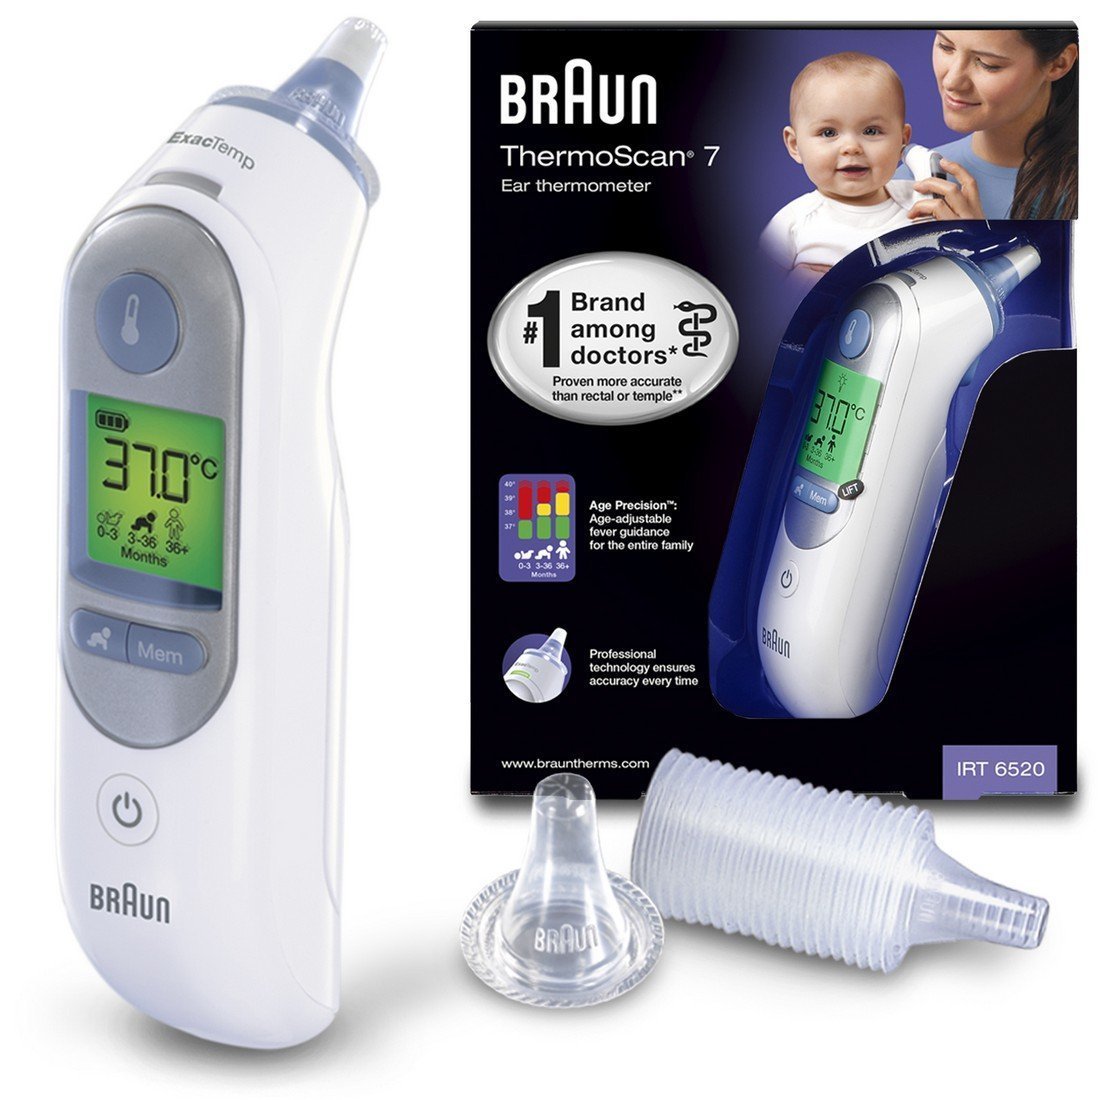 Ohrthermometer Test Braun Thermoscan 7